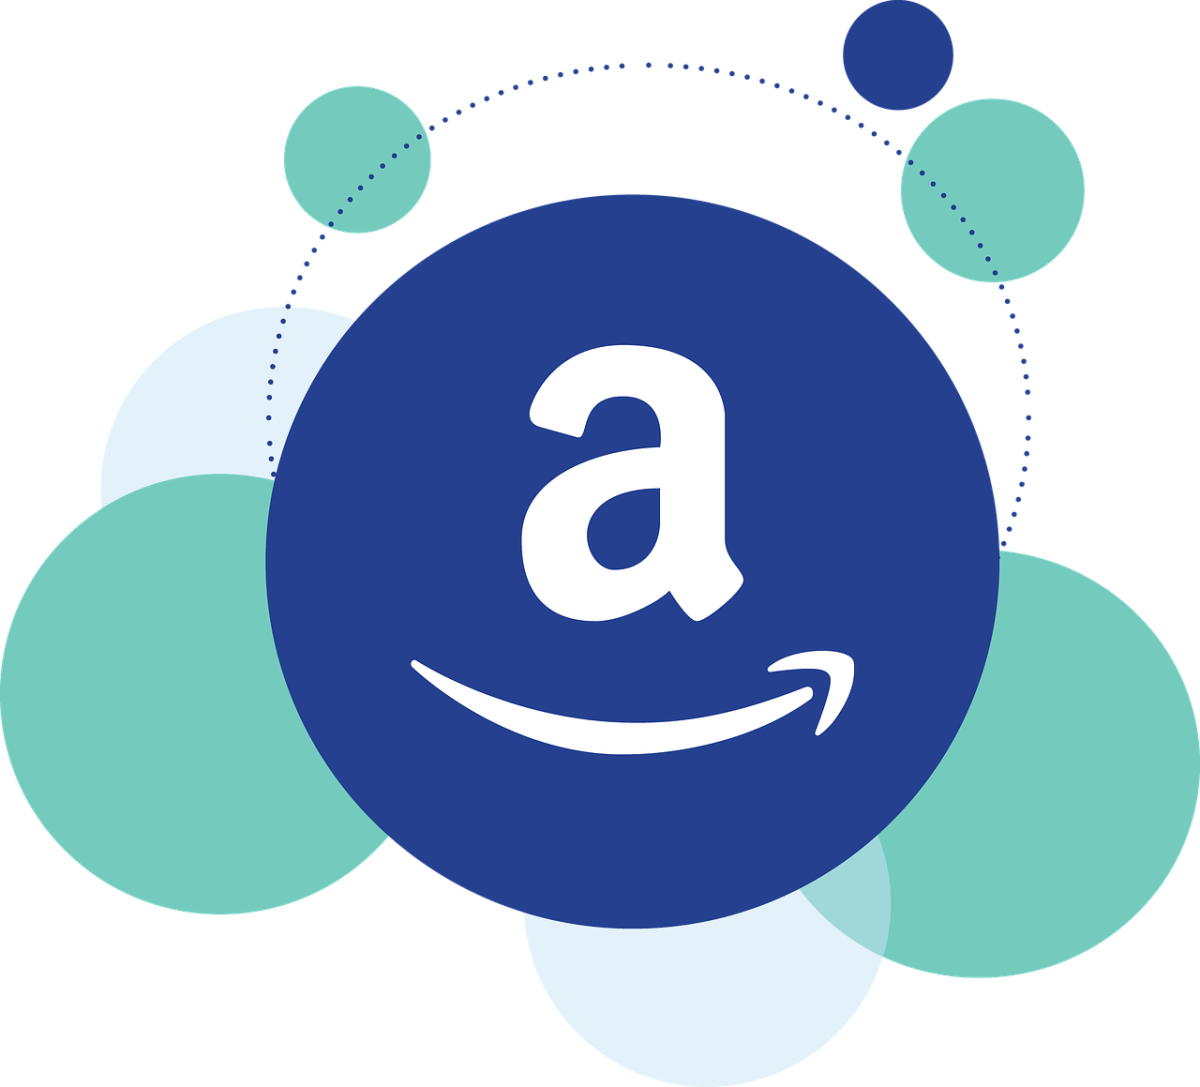 Did you know about these Amazon Competitors?